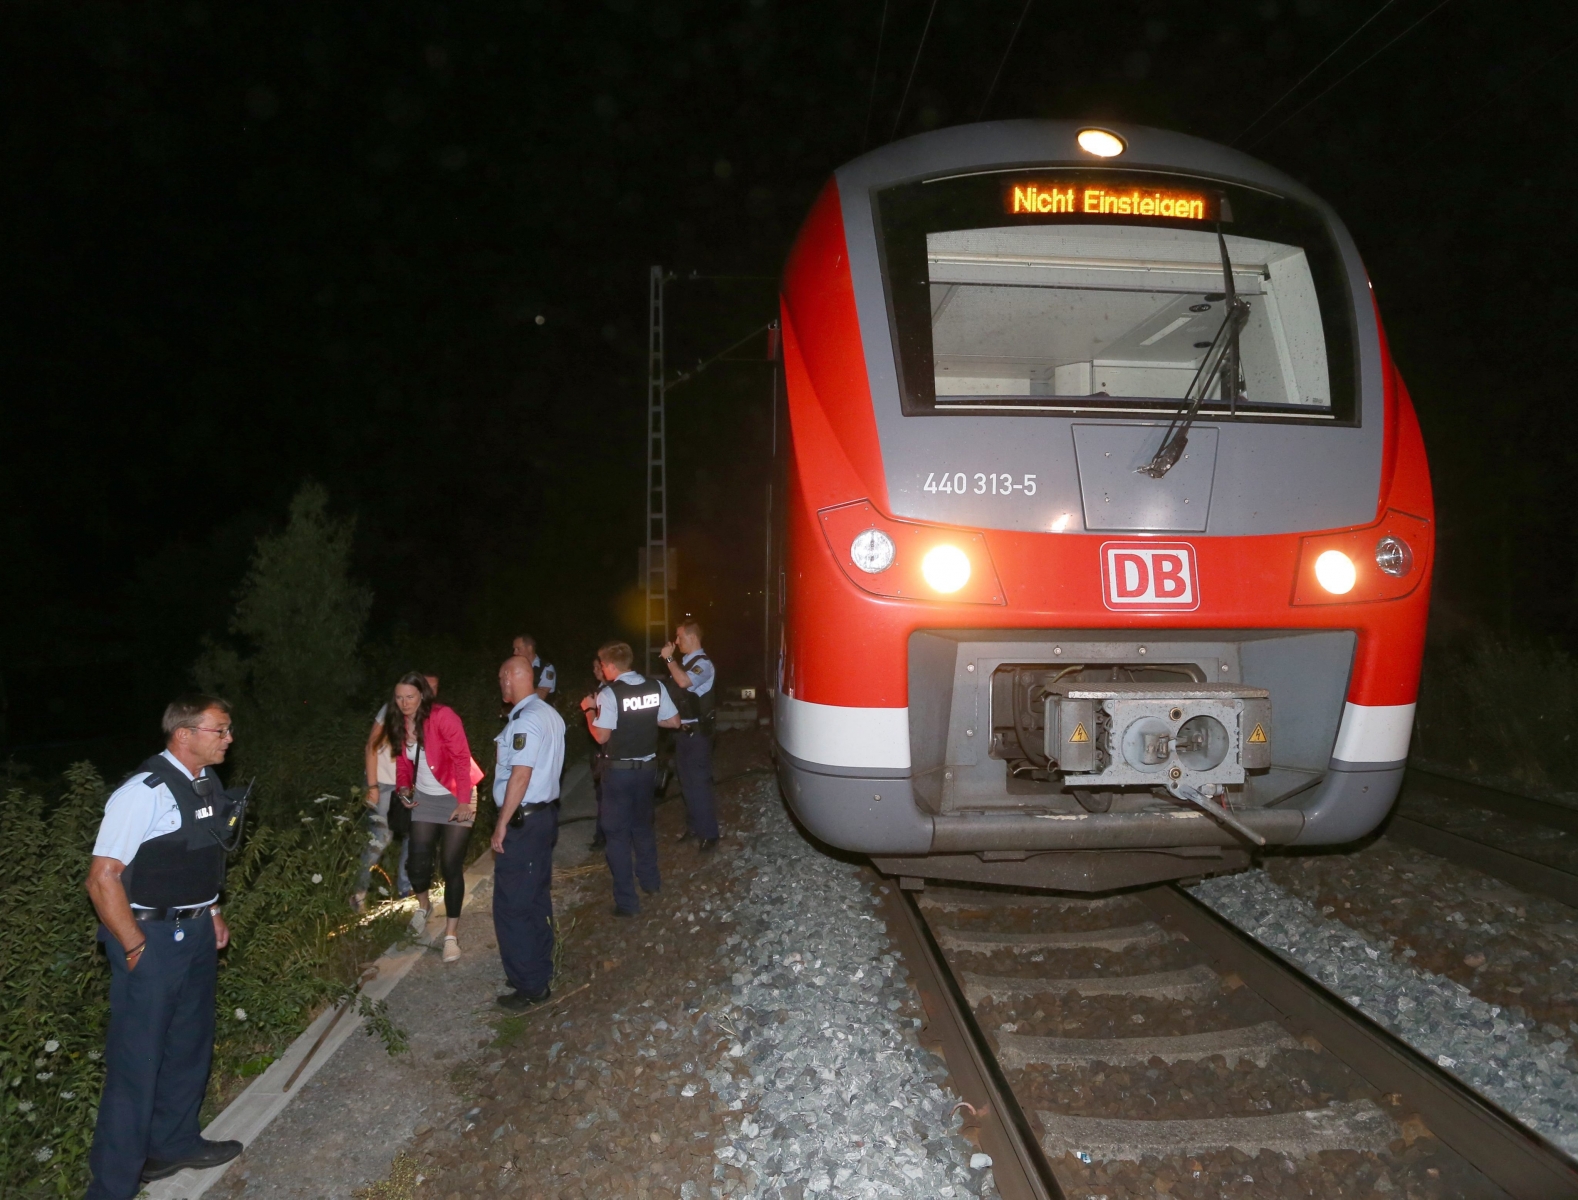 epa05431115 Police stand by the regional train on which a man allegedly wielding an axe attacked passengers in Wuerzburg, Germany, 18 July 2016. Reports state that a man allegedly wielding an axe injured multiple passengers on a regional train in Wuerzburg. The attacker was shot by police.  EPA/Karl-Josef Hildenbrand GERMANY TRAIN AXE ATTACK